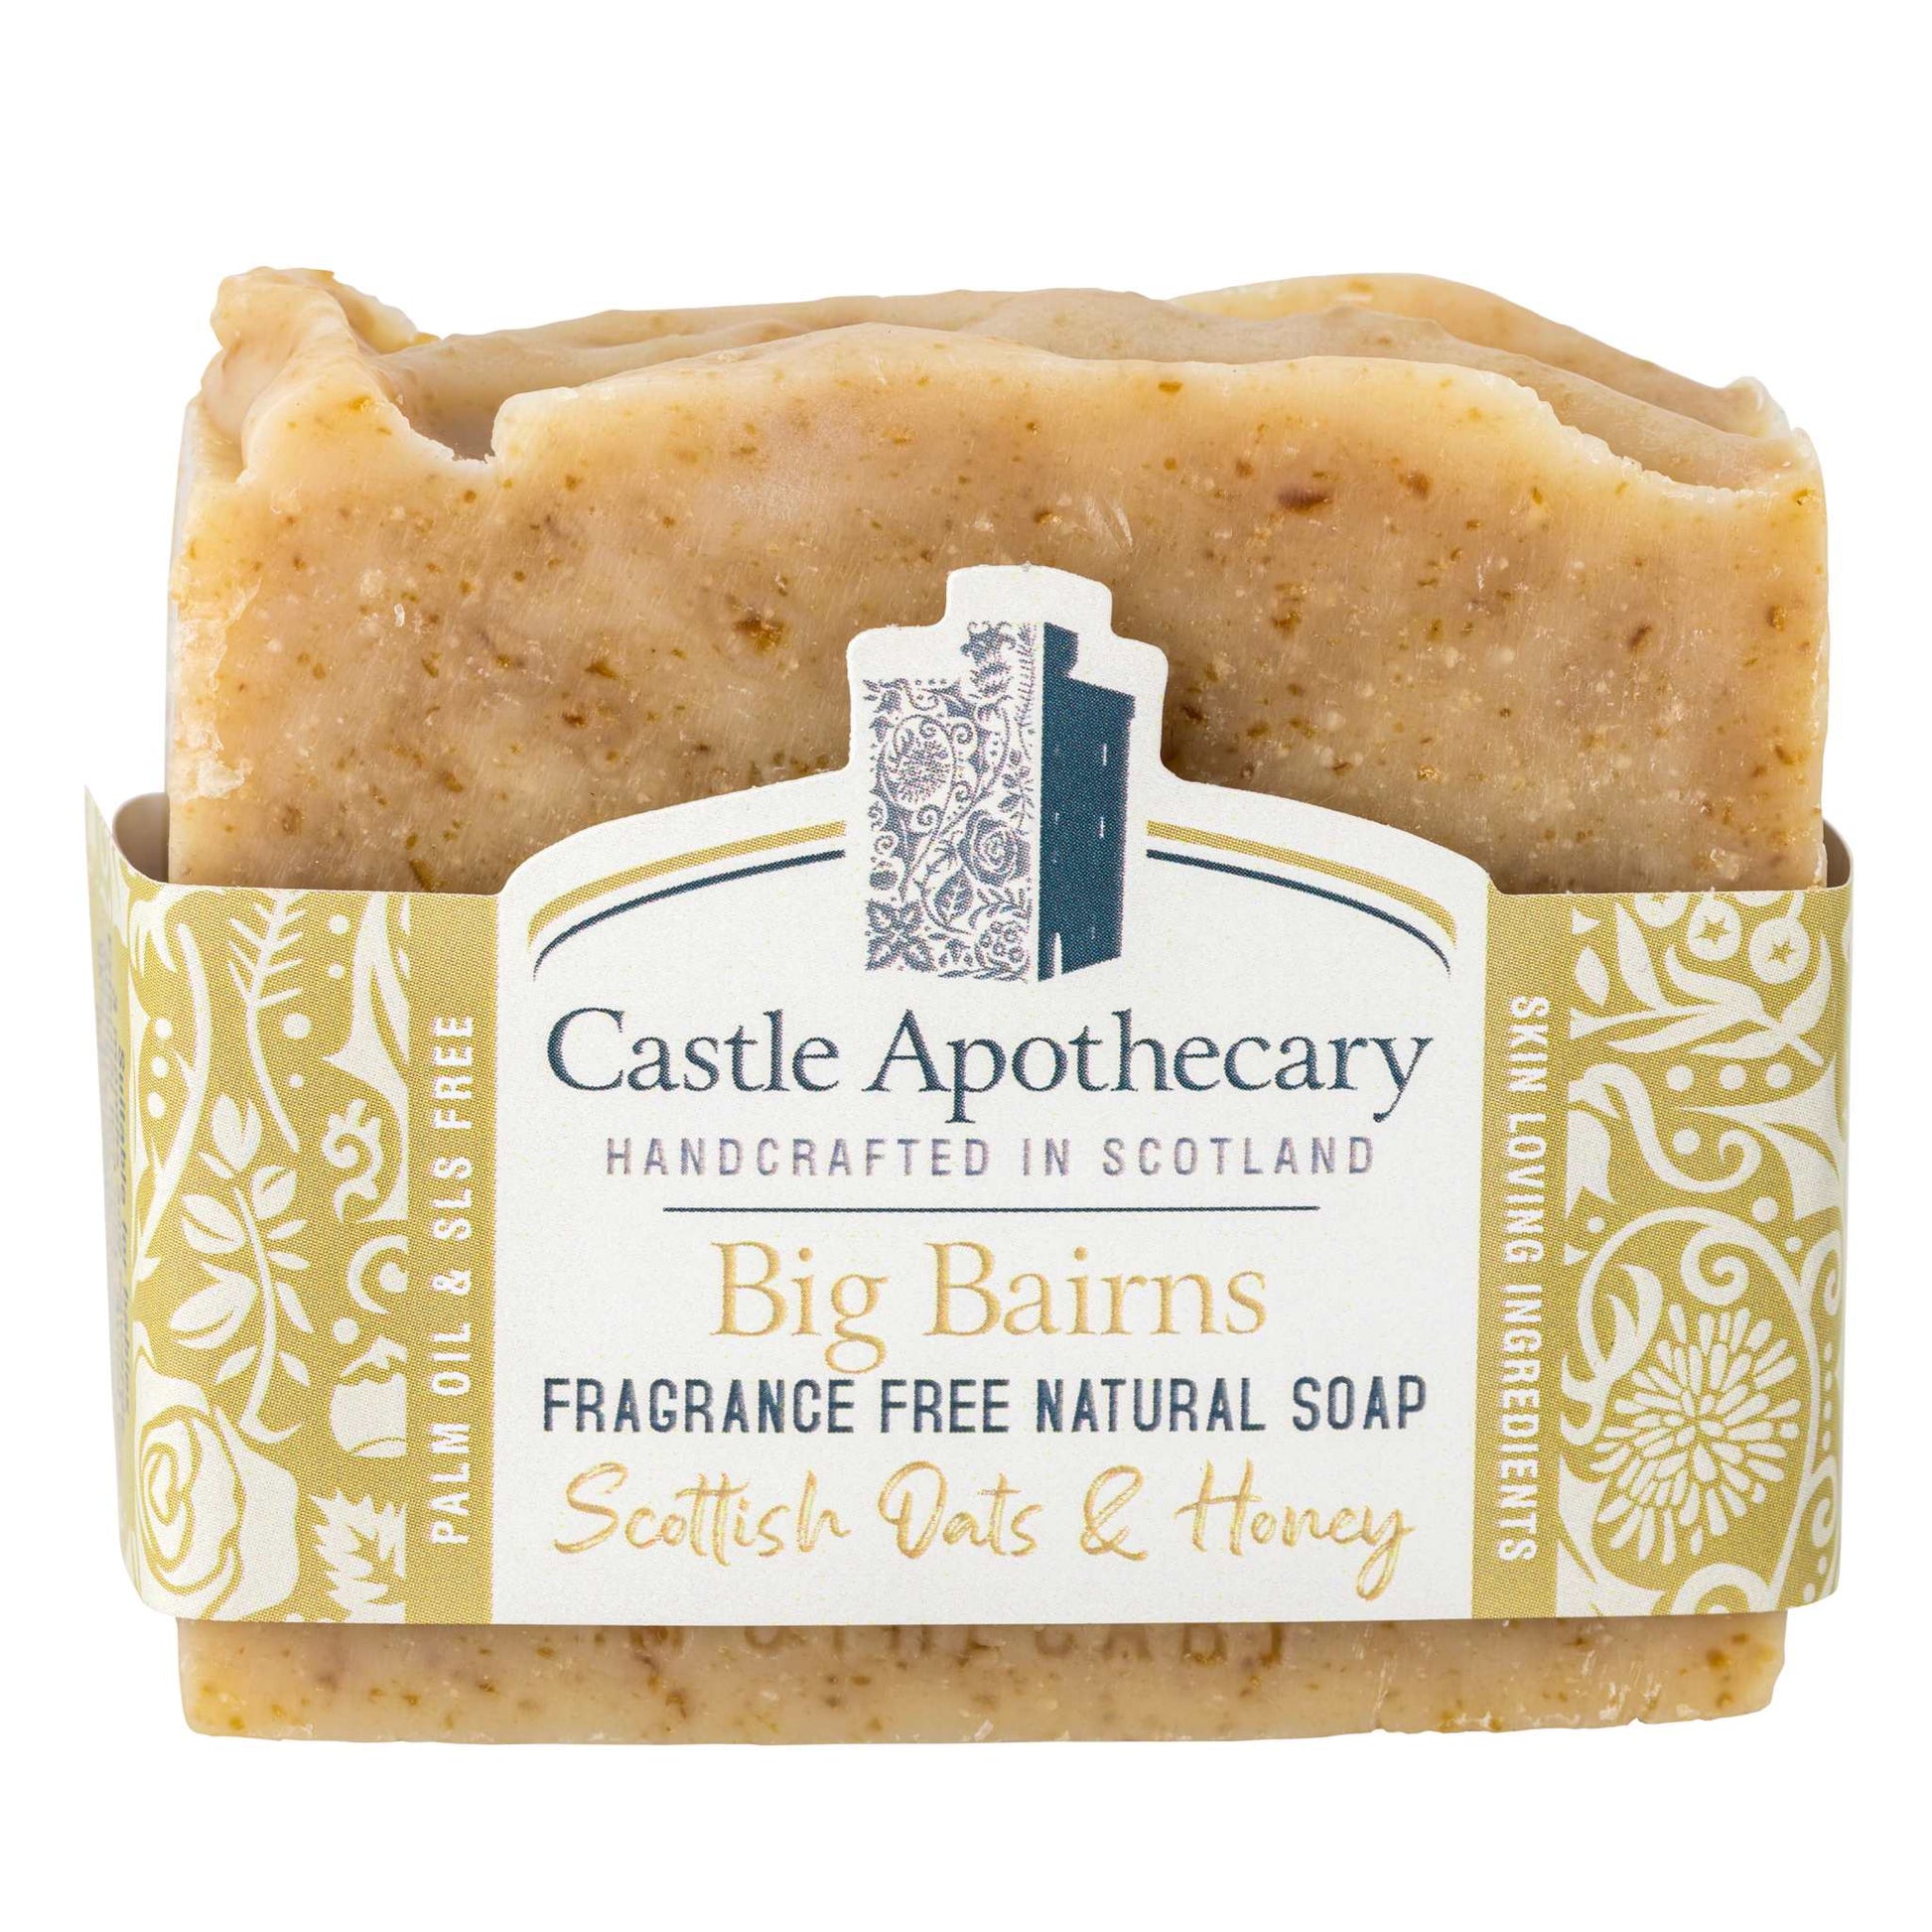 Scottish oats natural soap for baby and sensitive skin